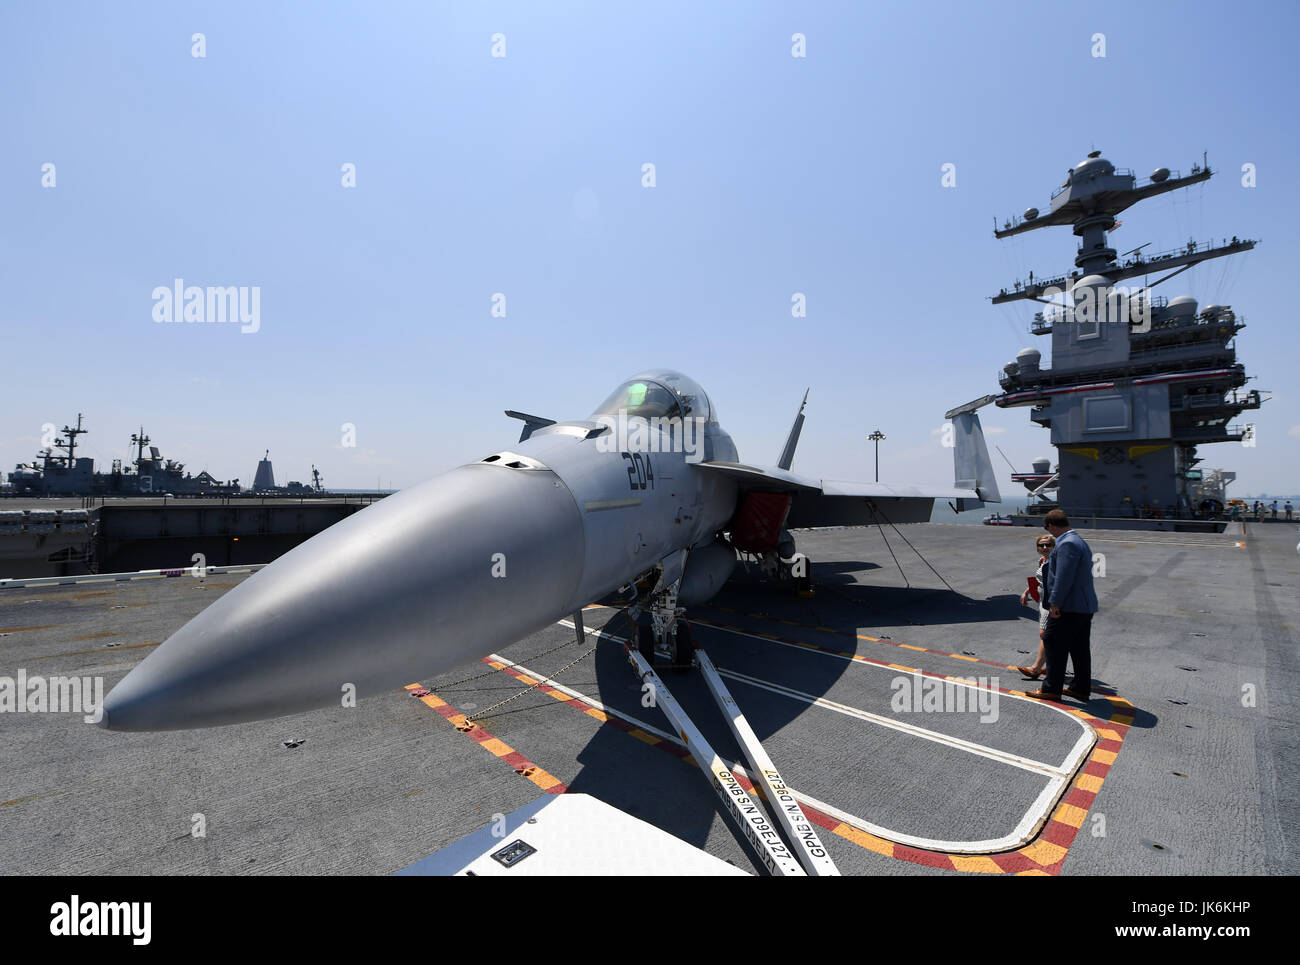 Norfolk, USA. 22nd July, 2017. Visitors view an F/A-18 Fighter on USS Gerald R. Ford after its commissioning ceremony at Naval Station Norfolk, Virginia, the United States, on July 22, 2017. The U.S. Navy commissioned United States Ship (USS) Gerald R. Ford, the newest and most advanced aircraft carrier, at Naval Station Norfolk, a navy base in Virginia on Saturday. Credit: Yin Bogu/Xinhua/Alamy Live News Stock Photo